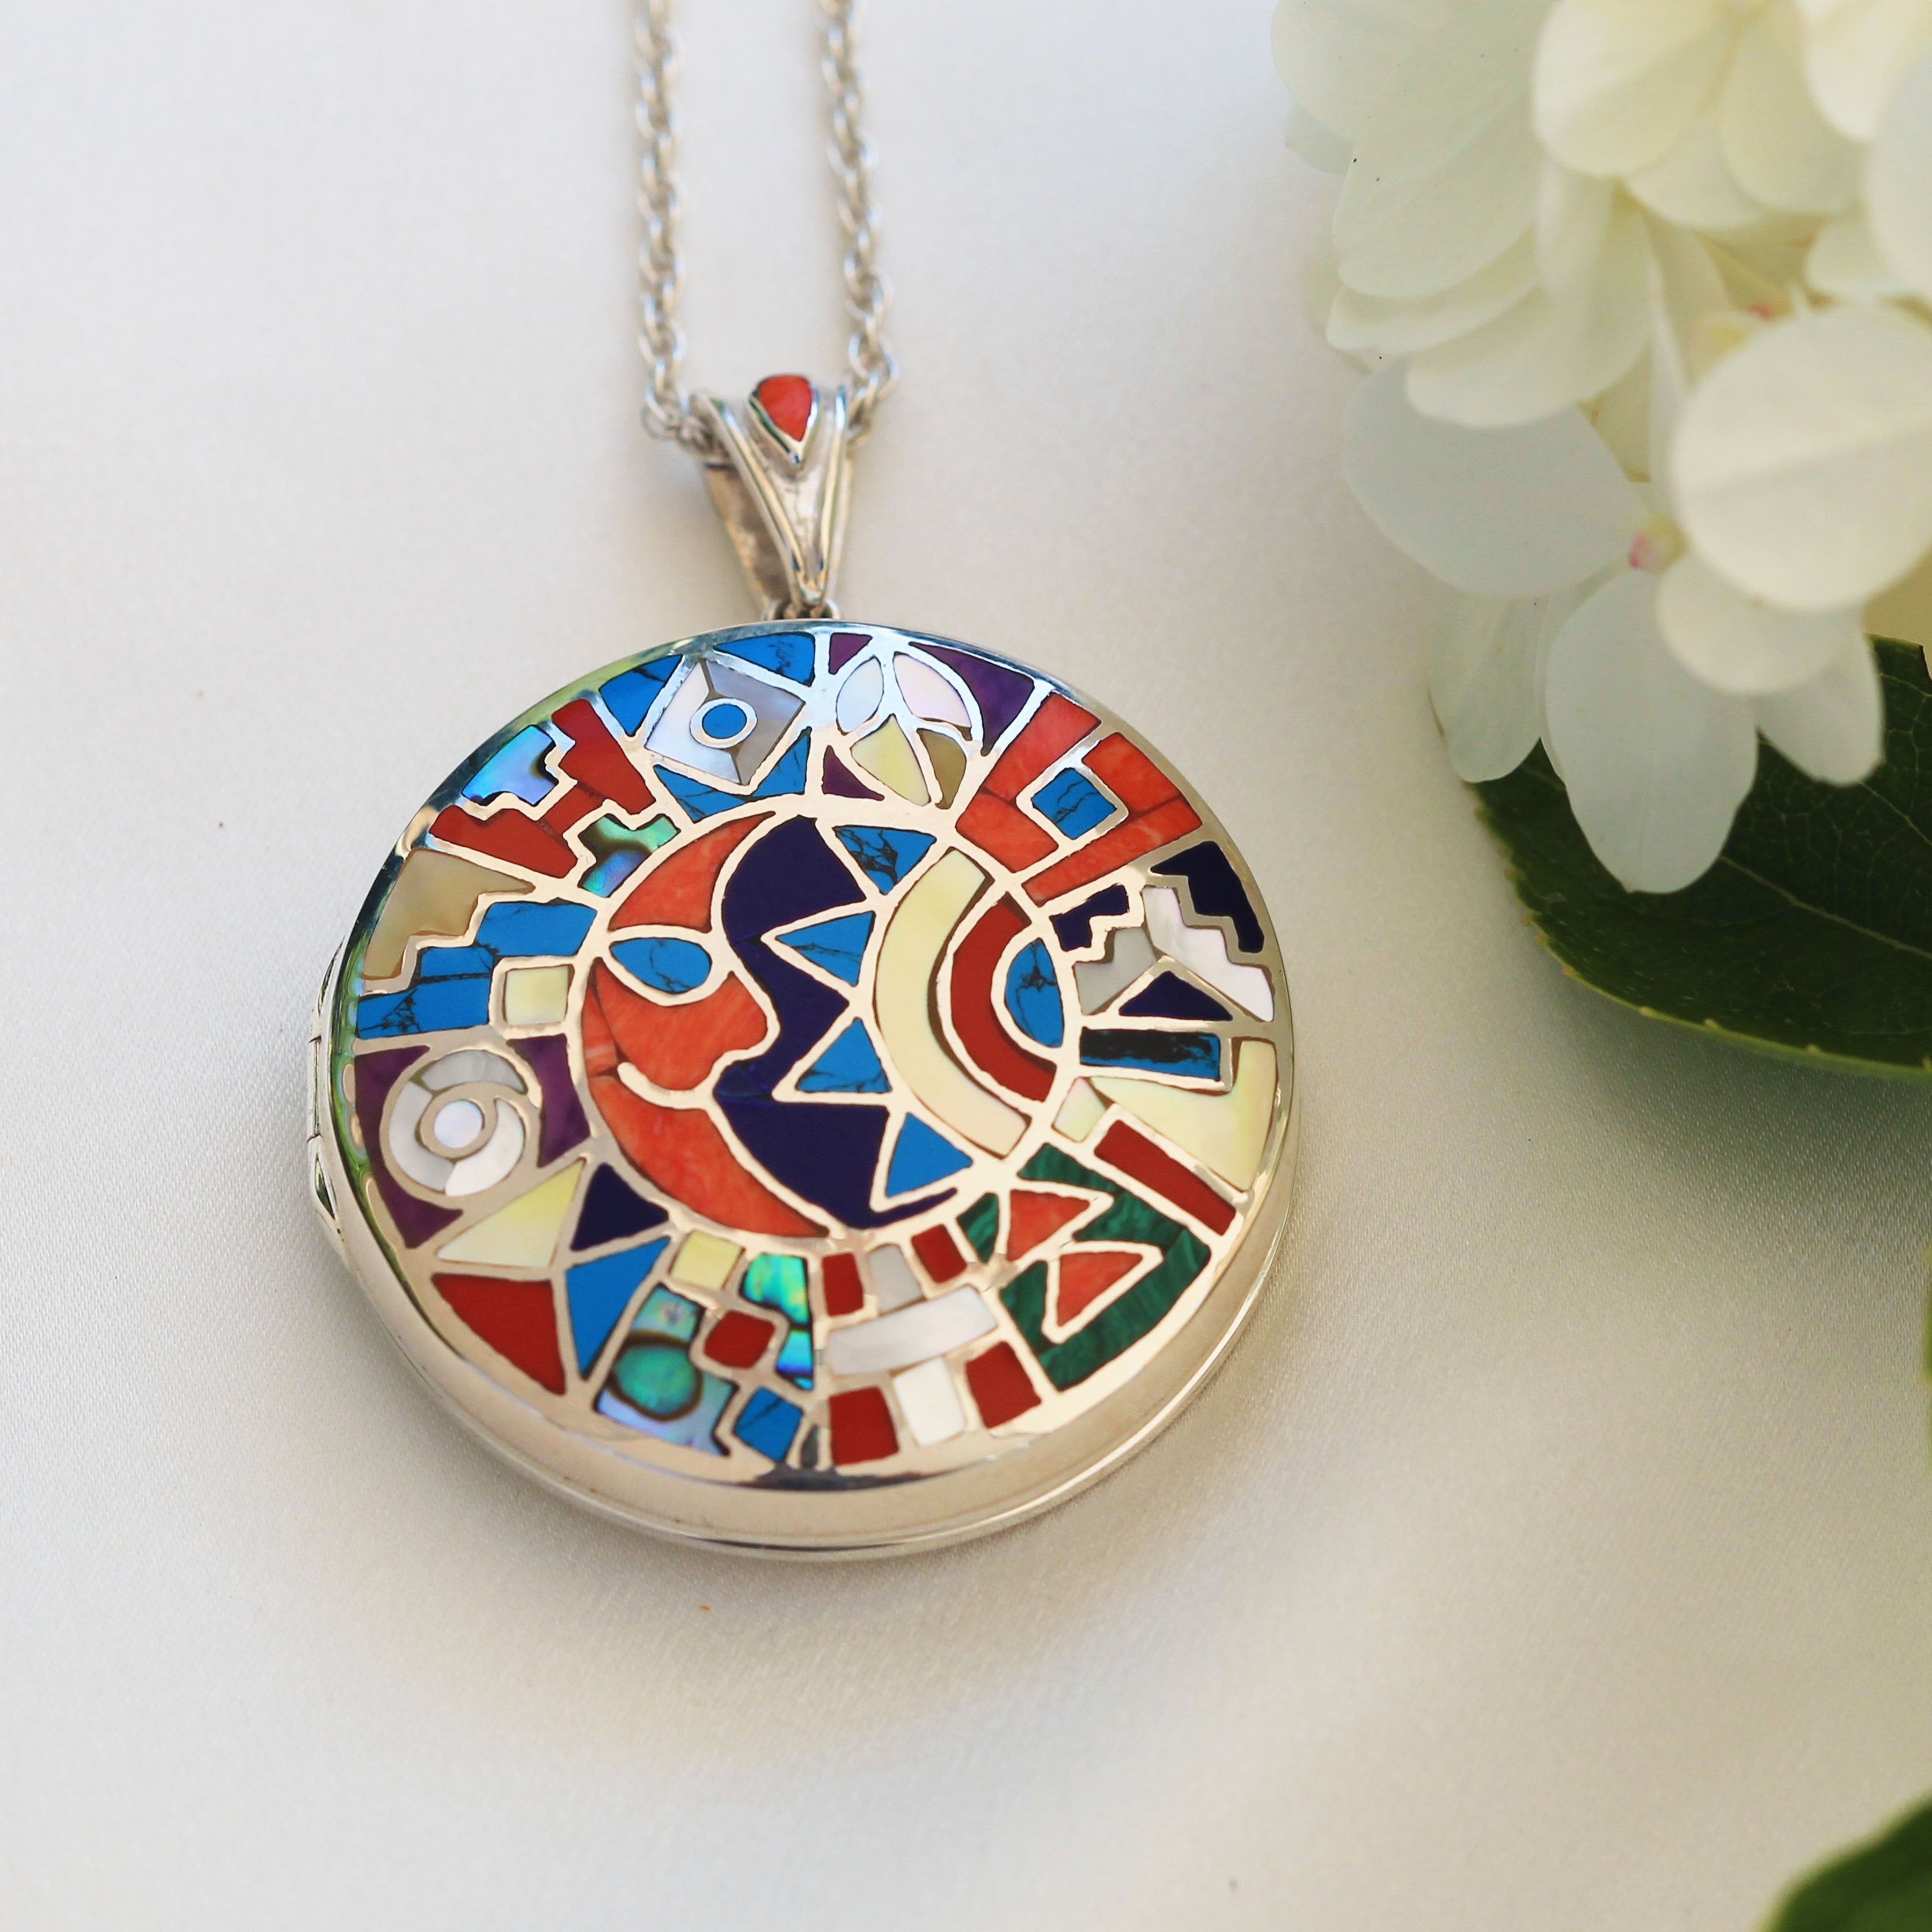 Product title: XL Sun and Moon Mosaic Locket, product type: Locket